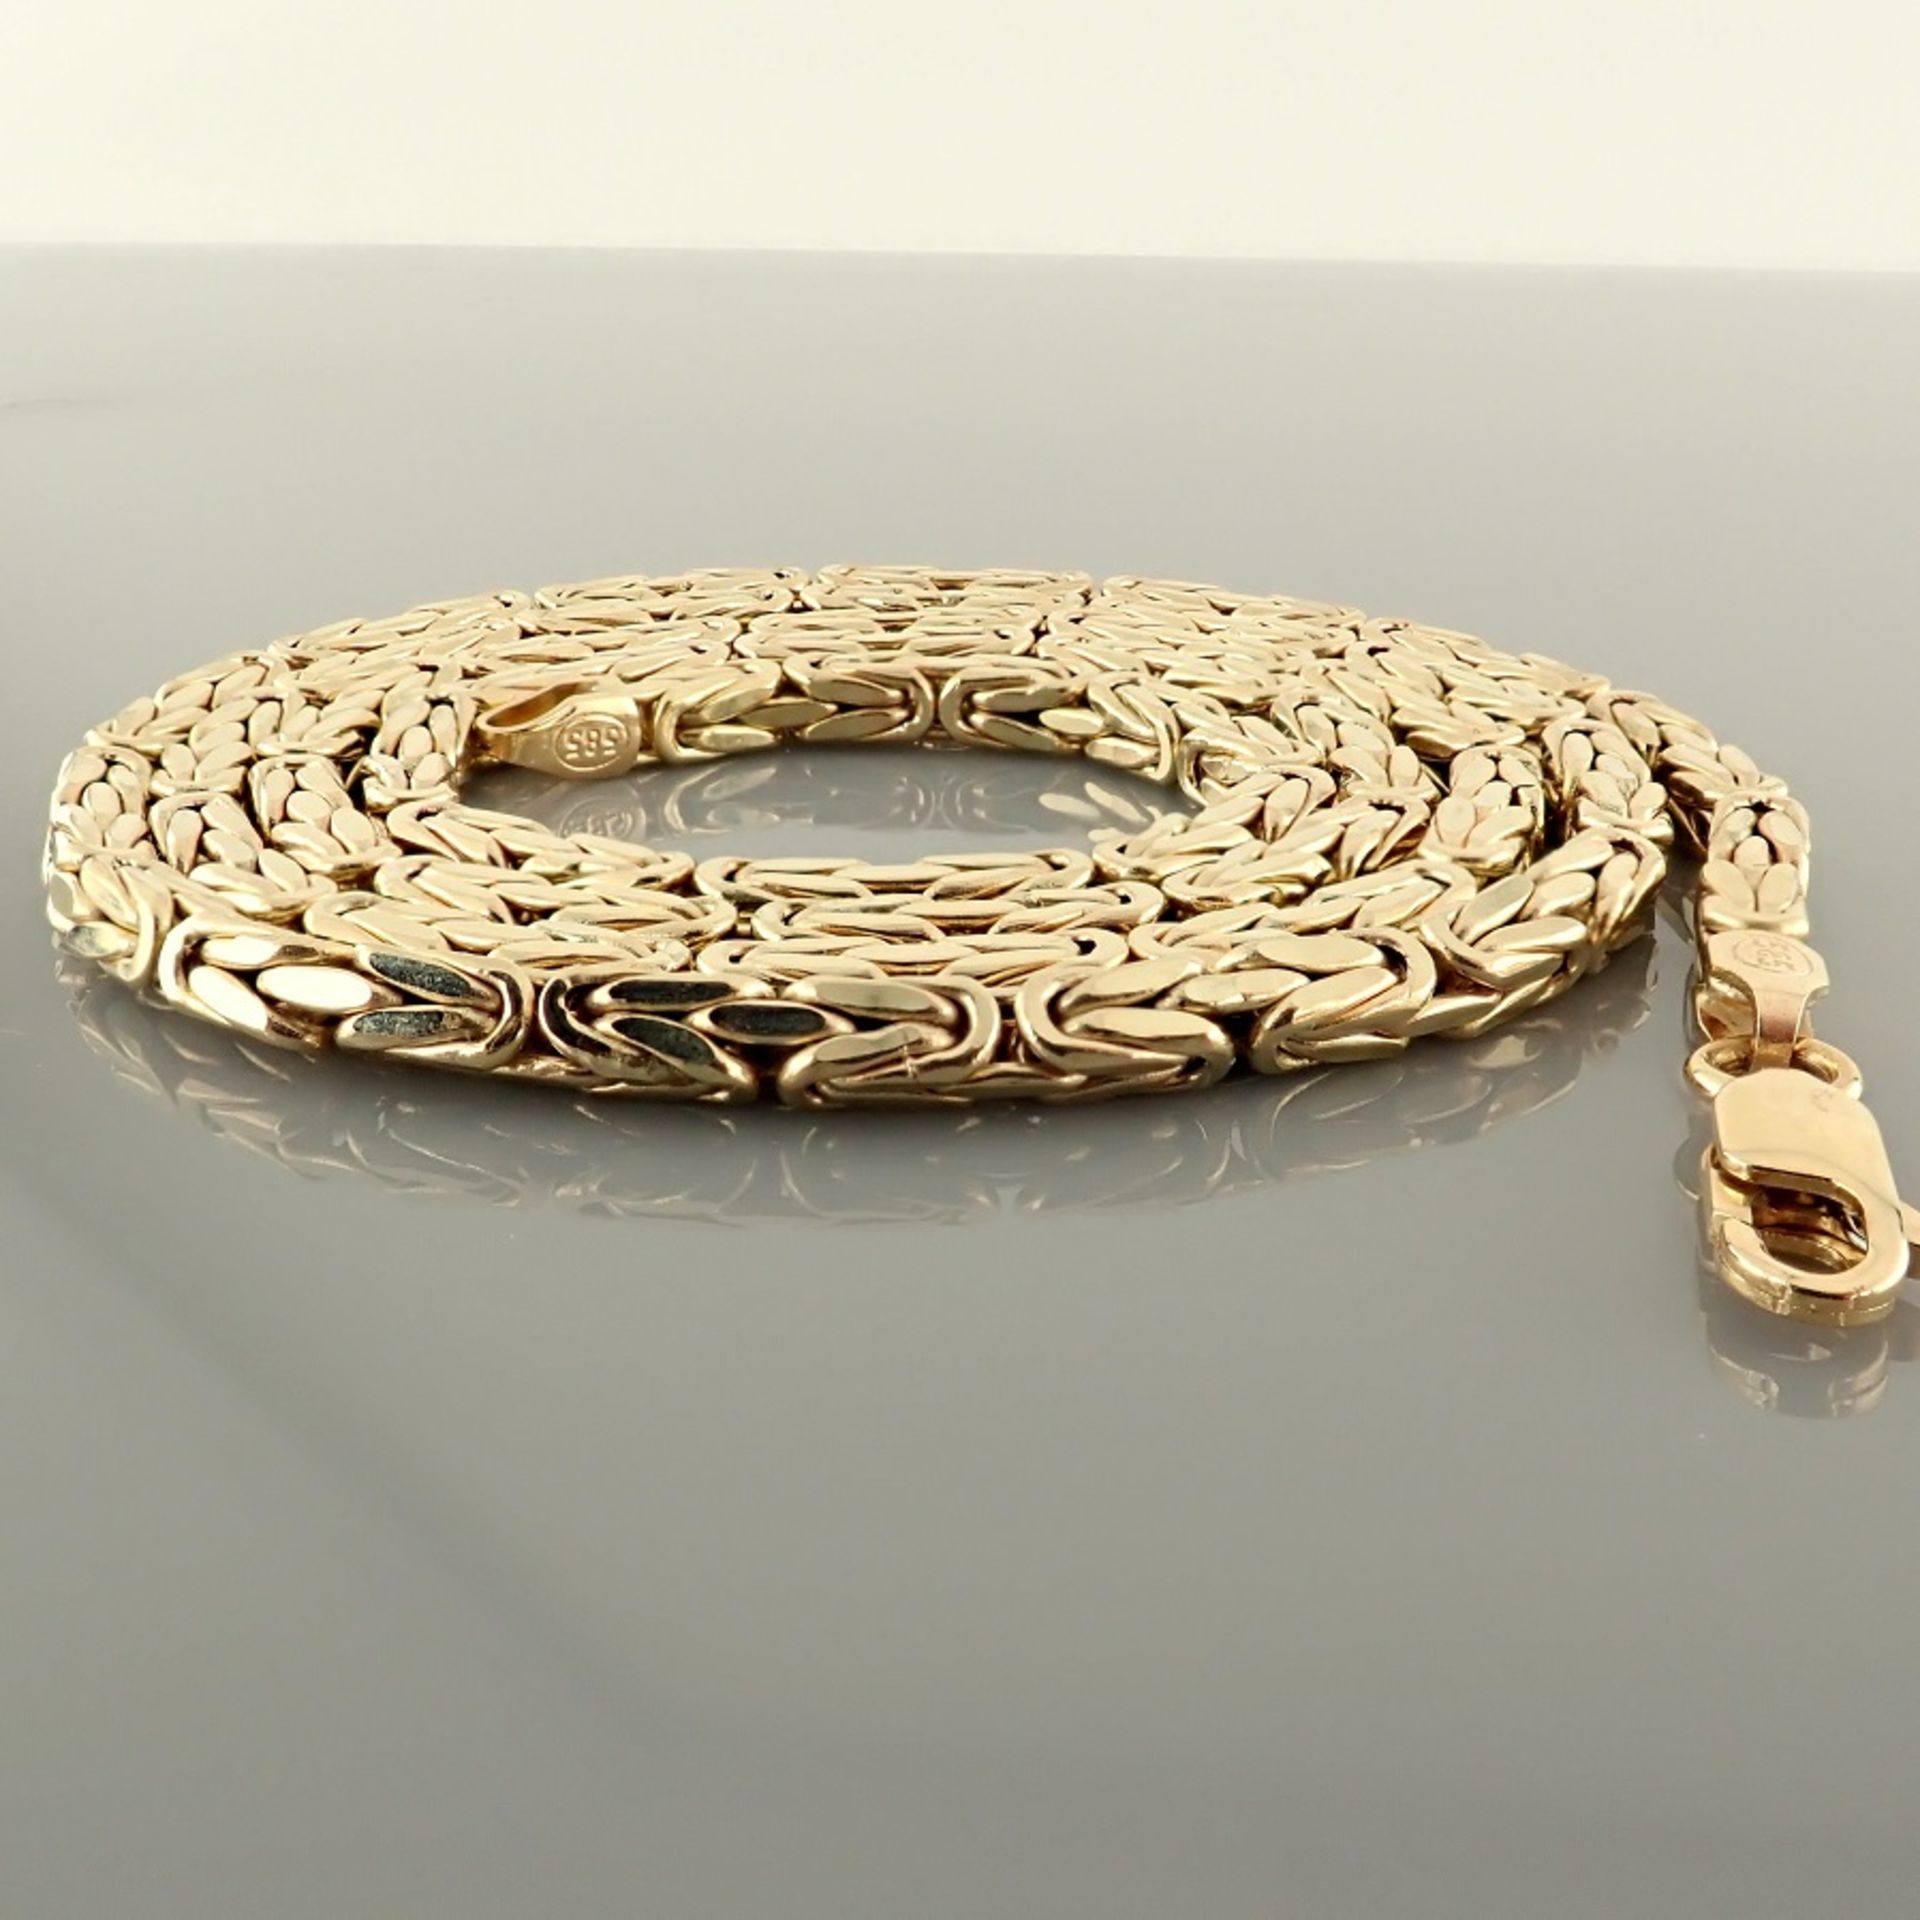 24.4 In (62 cm) Byzantine Chain Necklace. In 14K Yellow Gold - Image 2 of 3